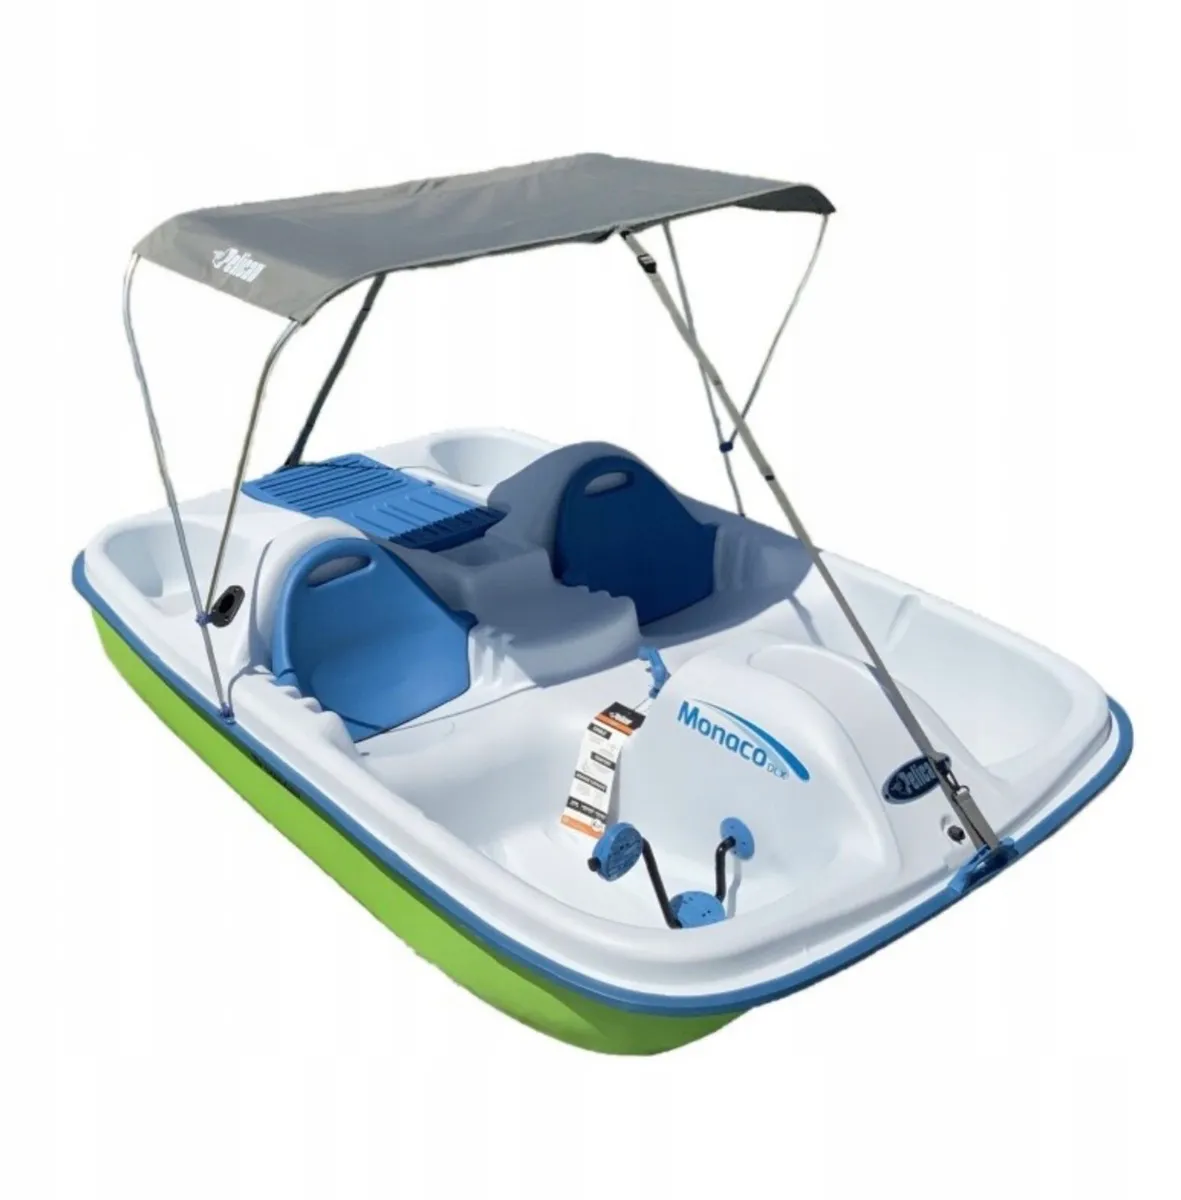 Pedal boat with canopy - Image 1